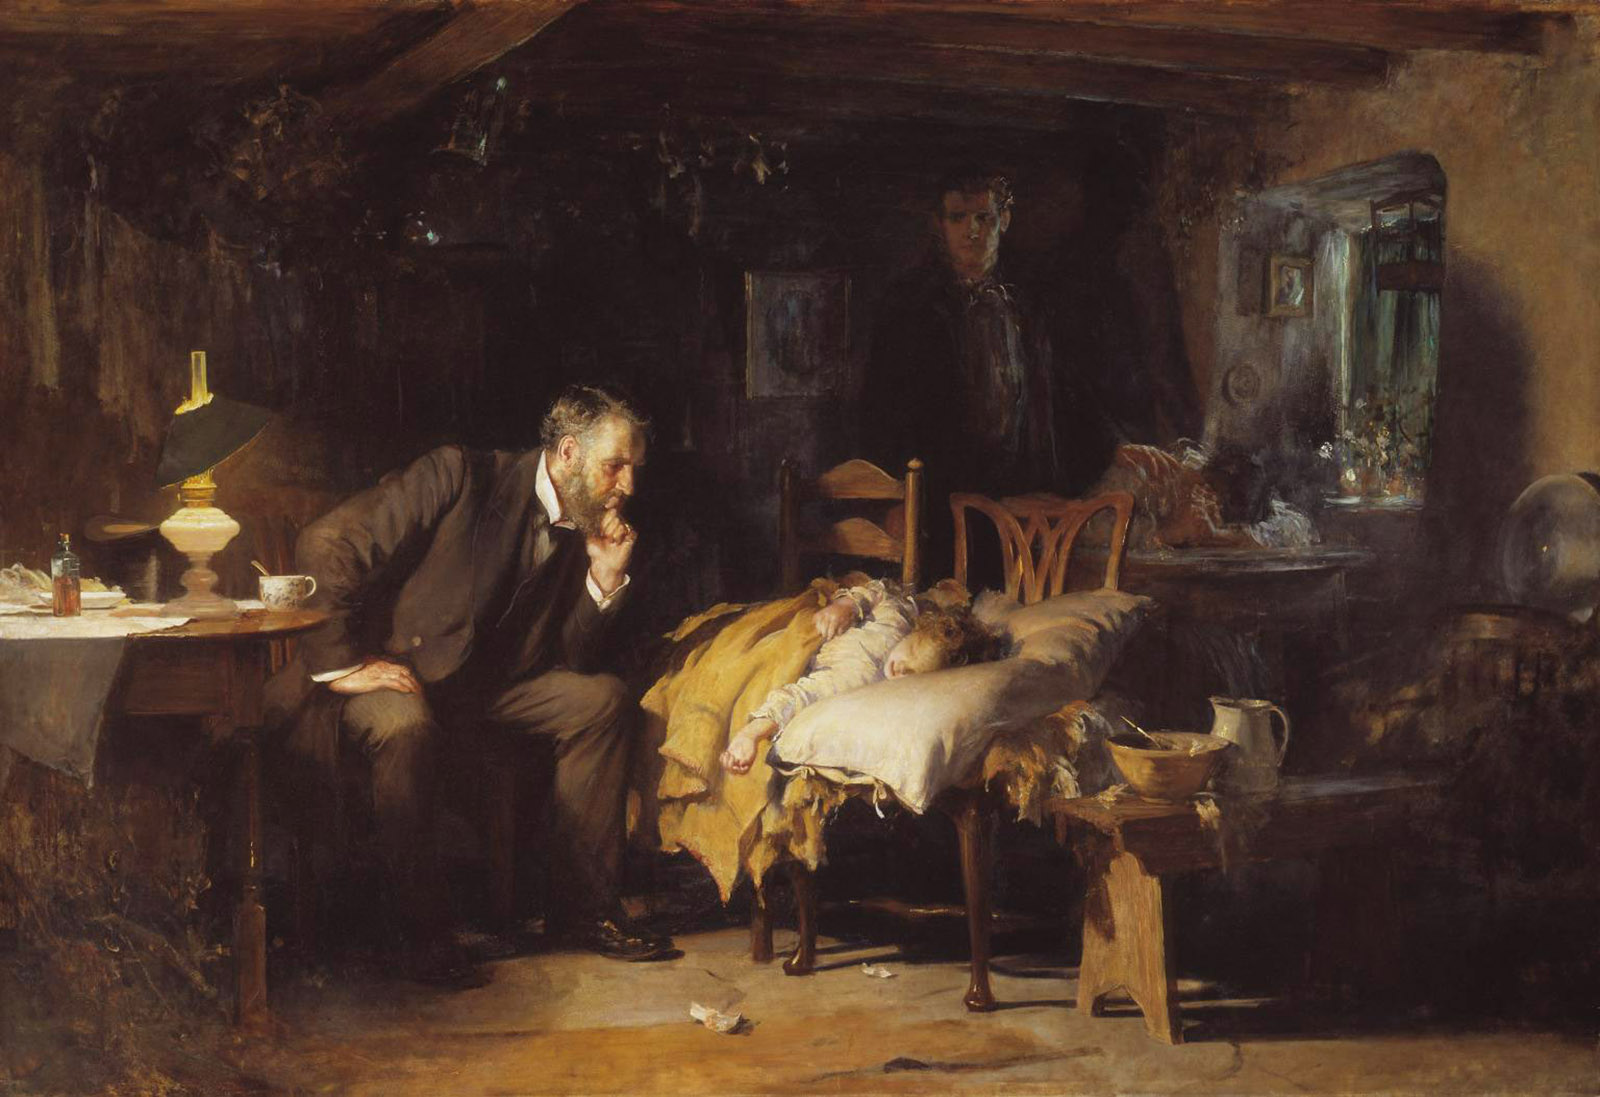 The Doctor exhibited 1891